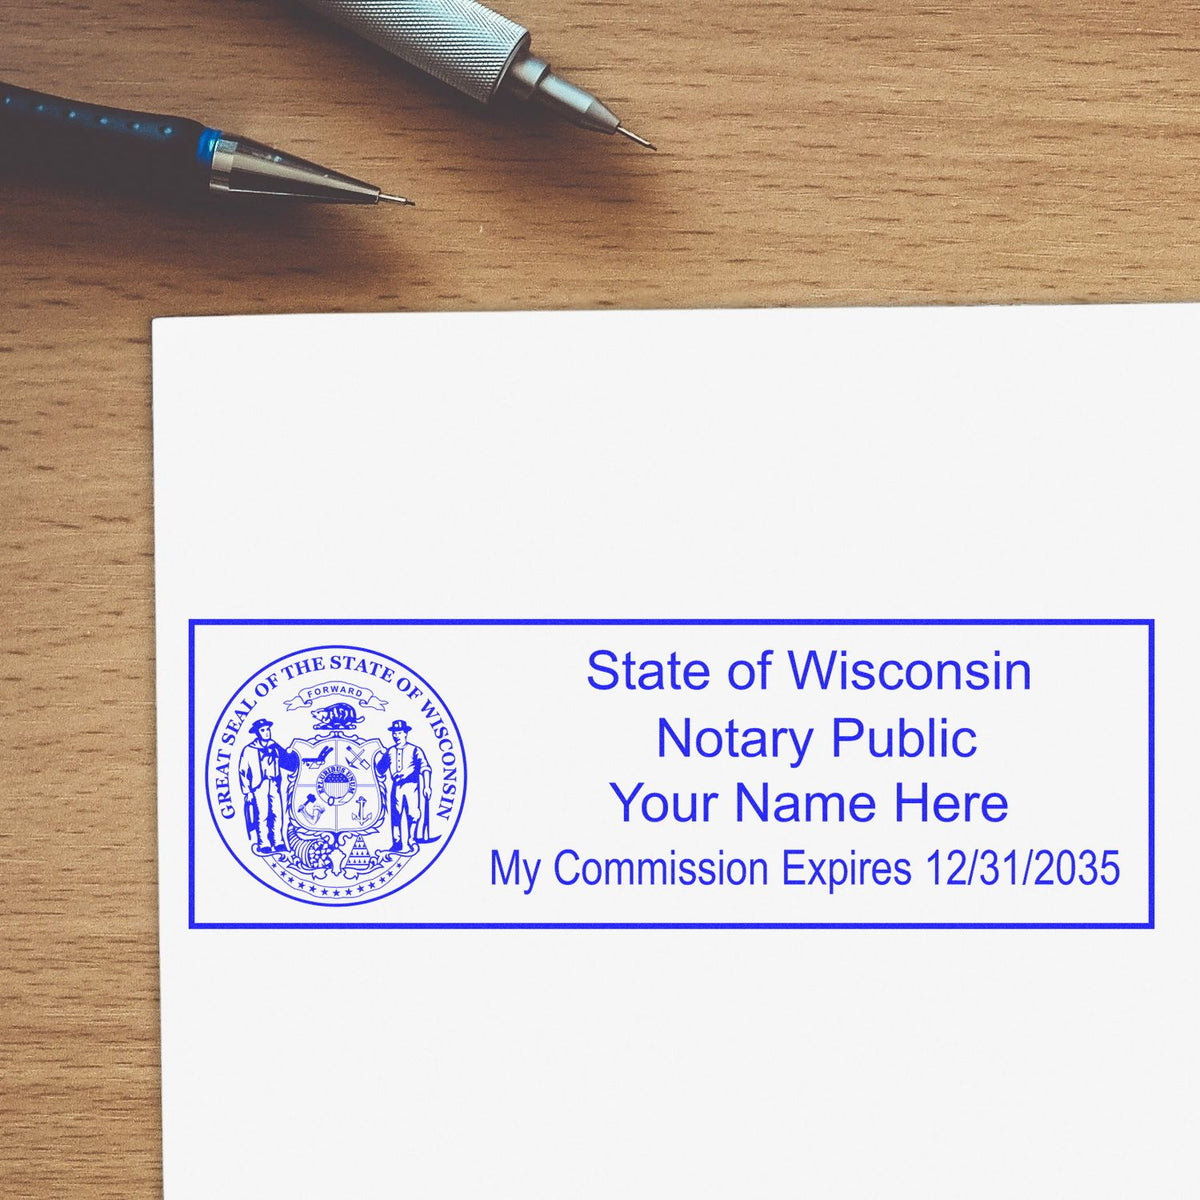 An alternative view of the Super Slim Wisconsin Notary Public Stamp stamped on a sheet of paper showing the image in use